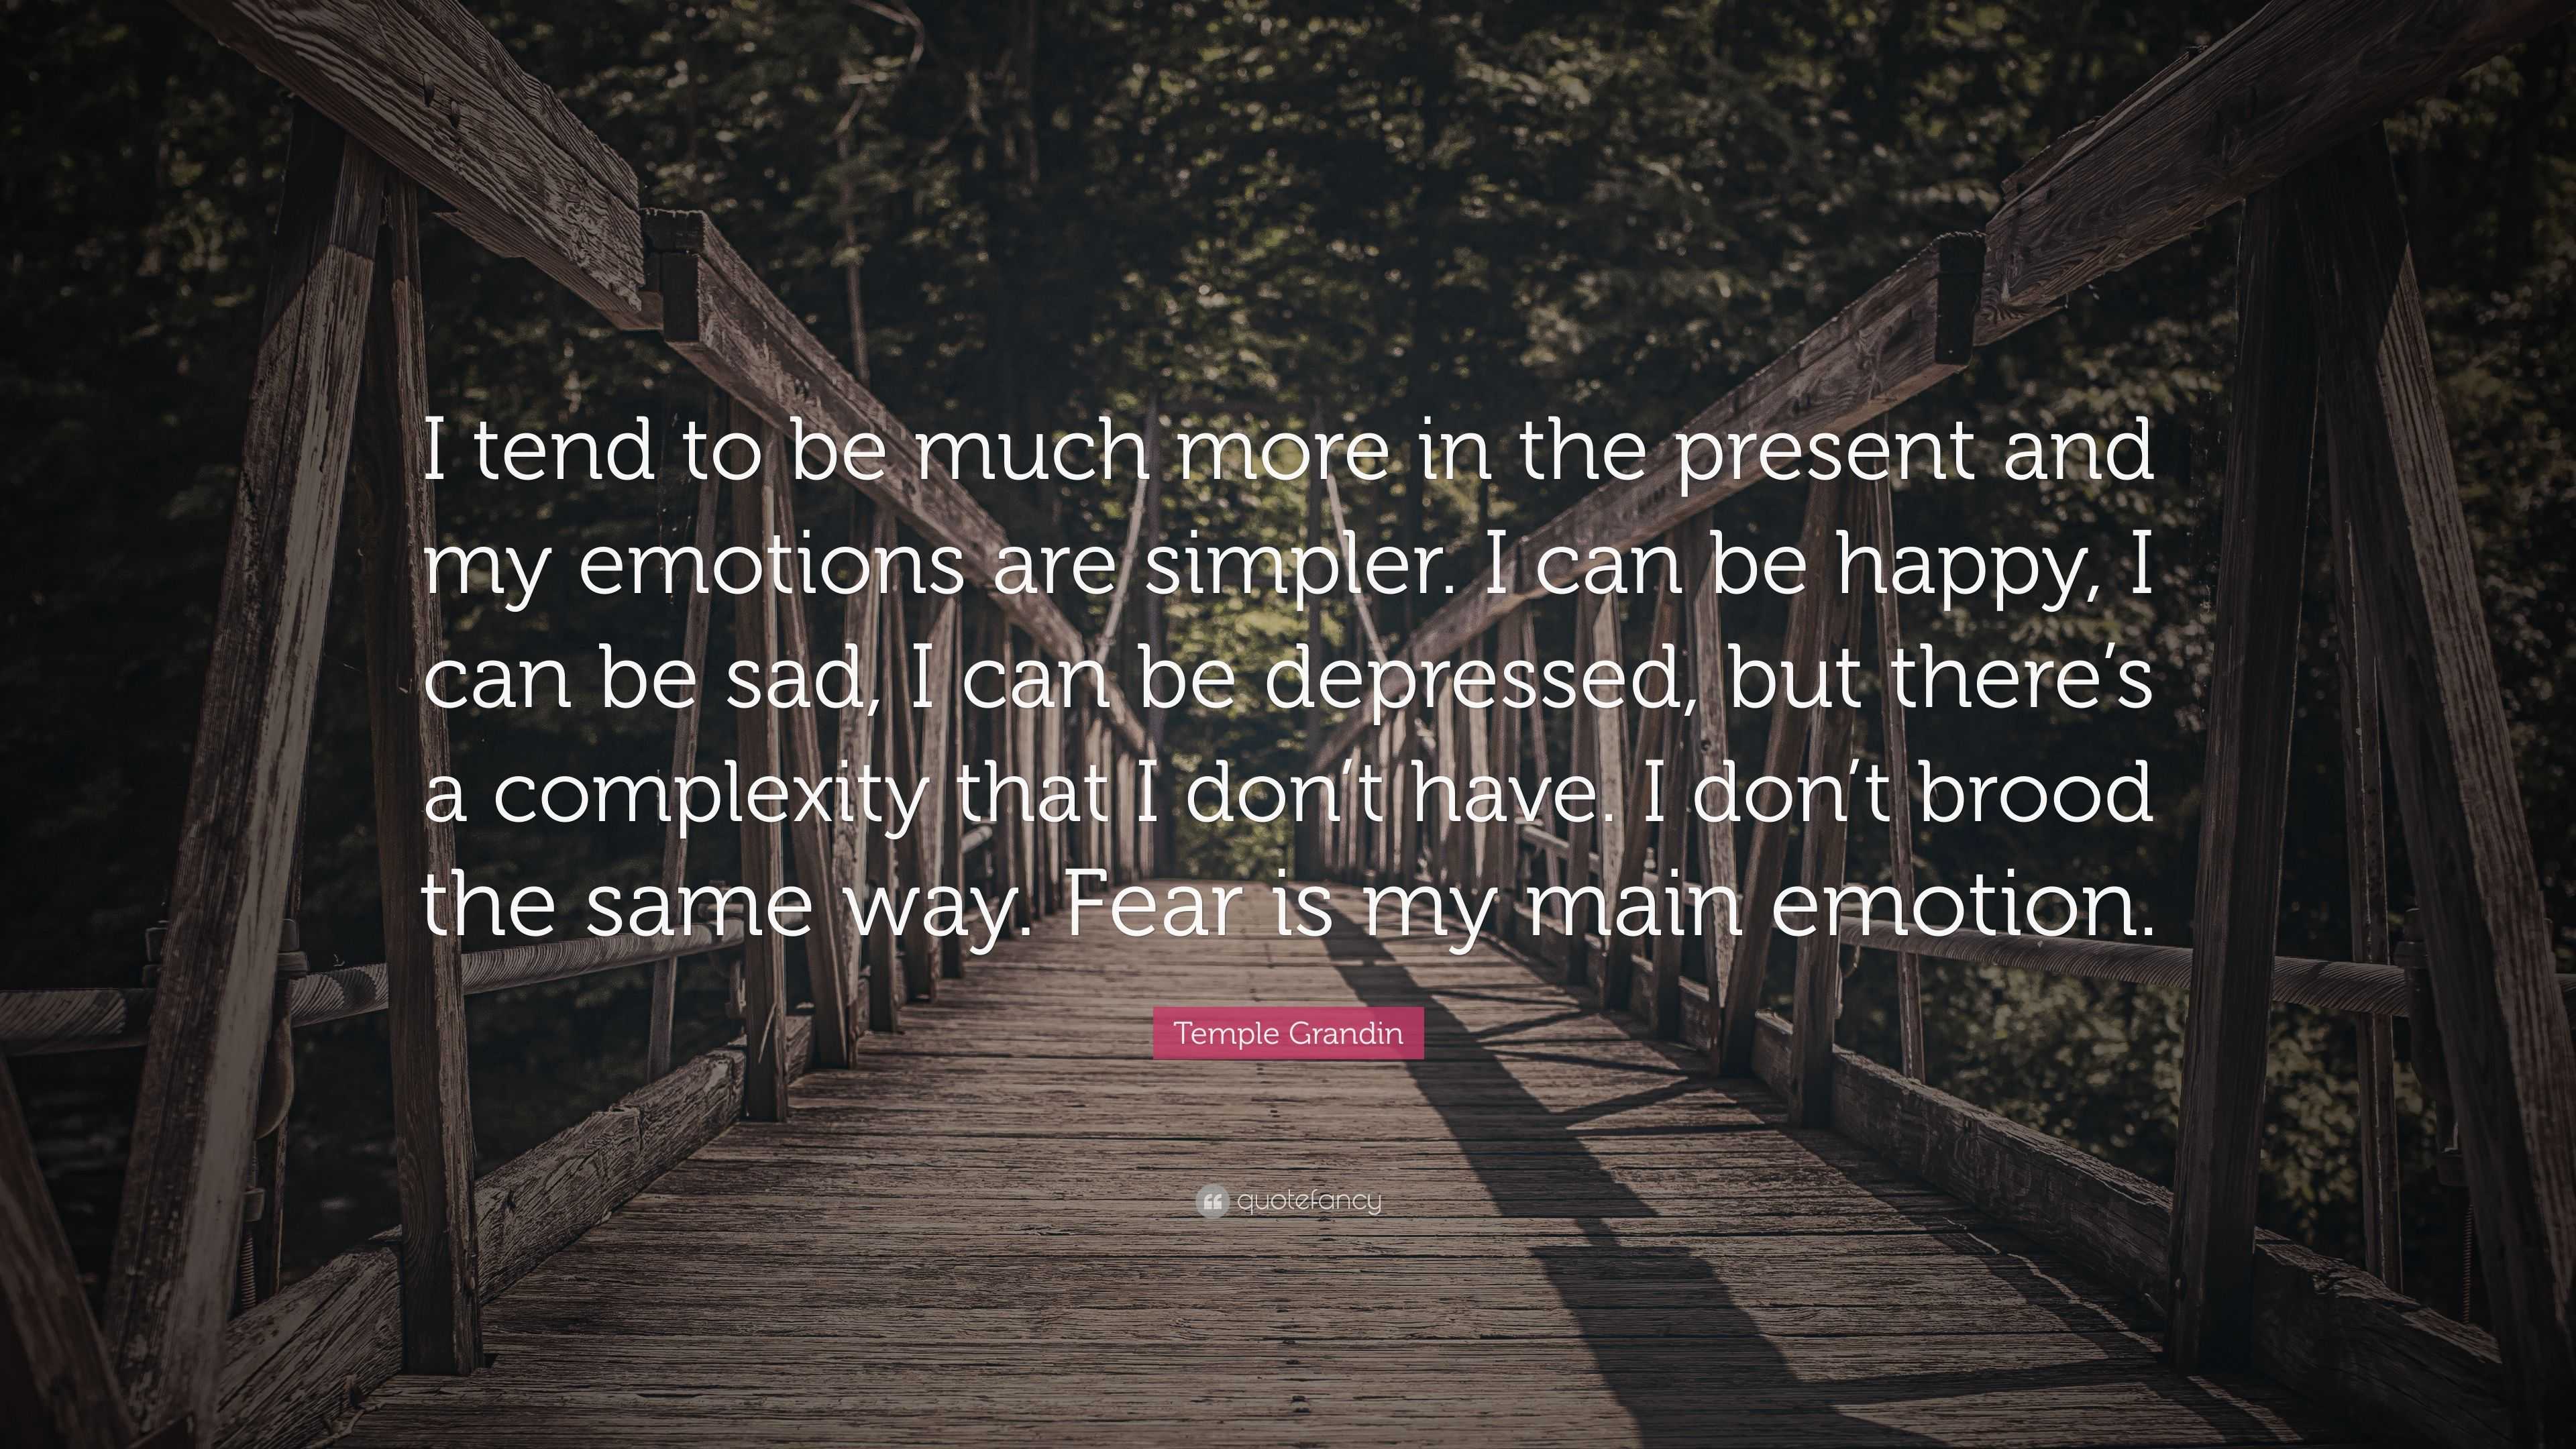 Temple Grandin Quote: “I tend to be much more in the present and my ...